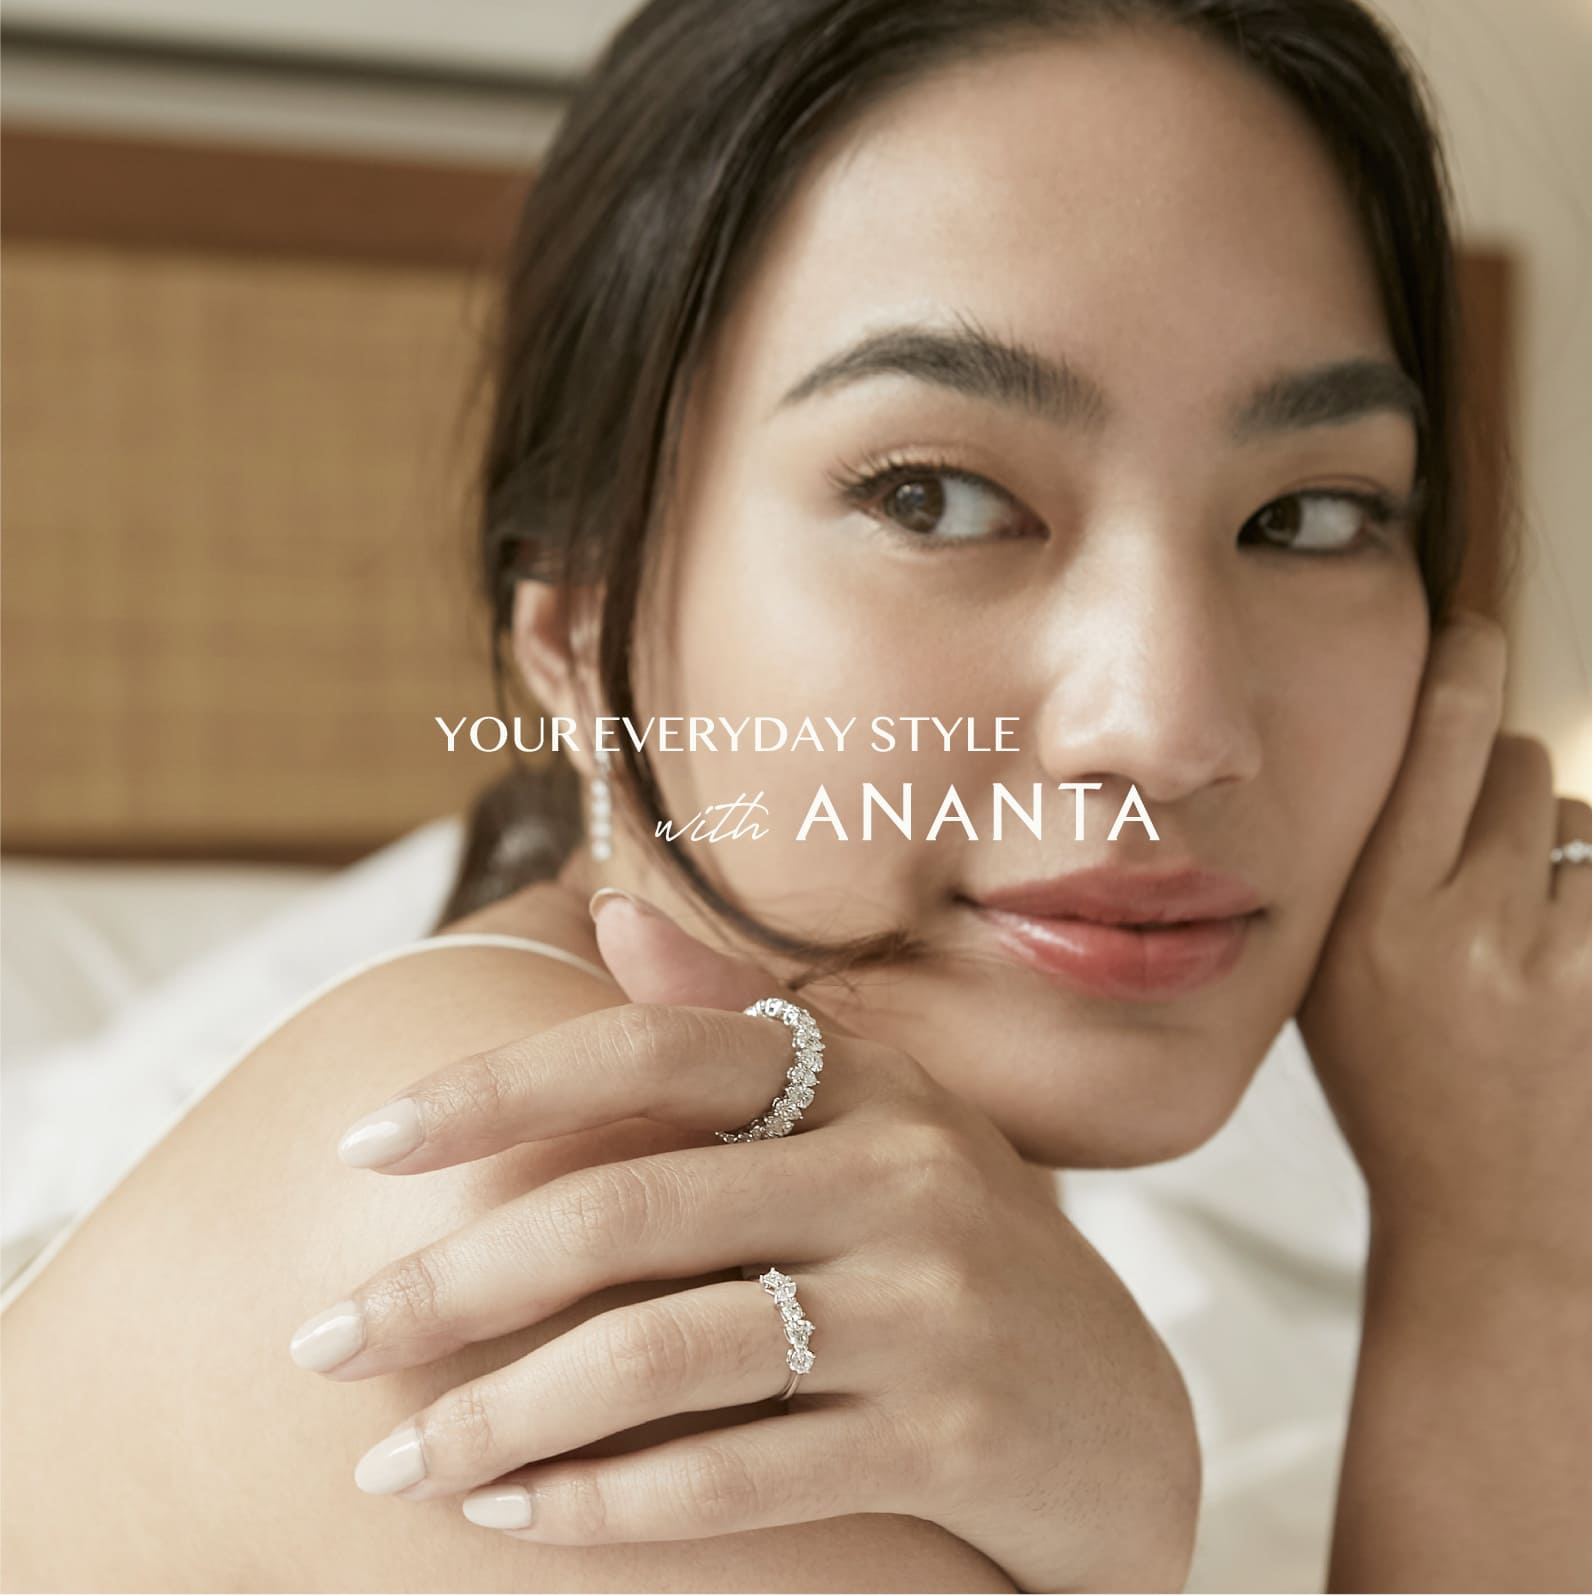 Your Everyday Style with ANANTA